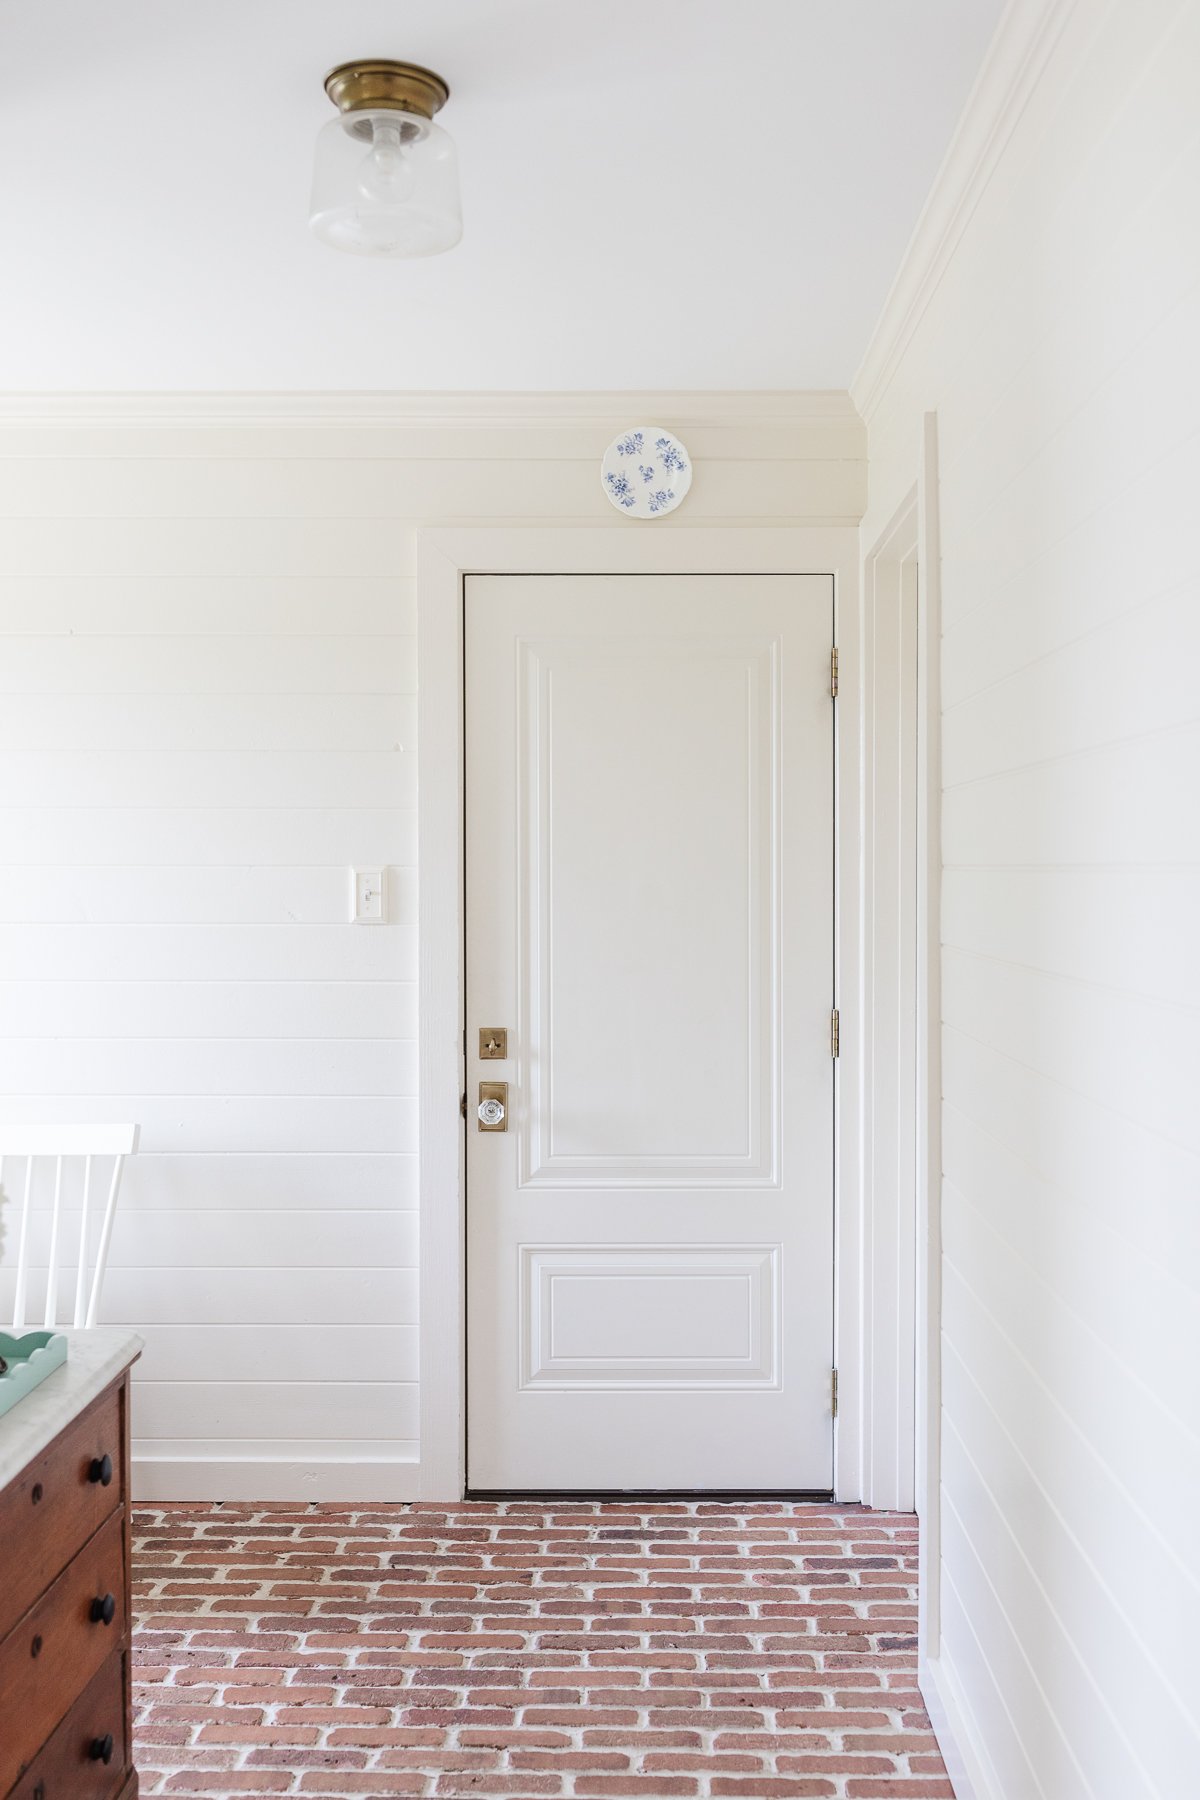 A mudroom with white wood paneled walls and brick flooring.